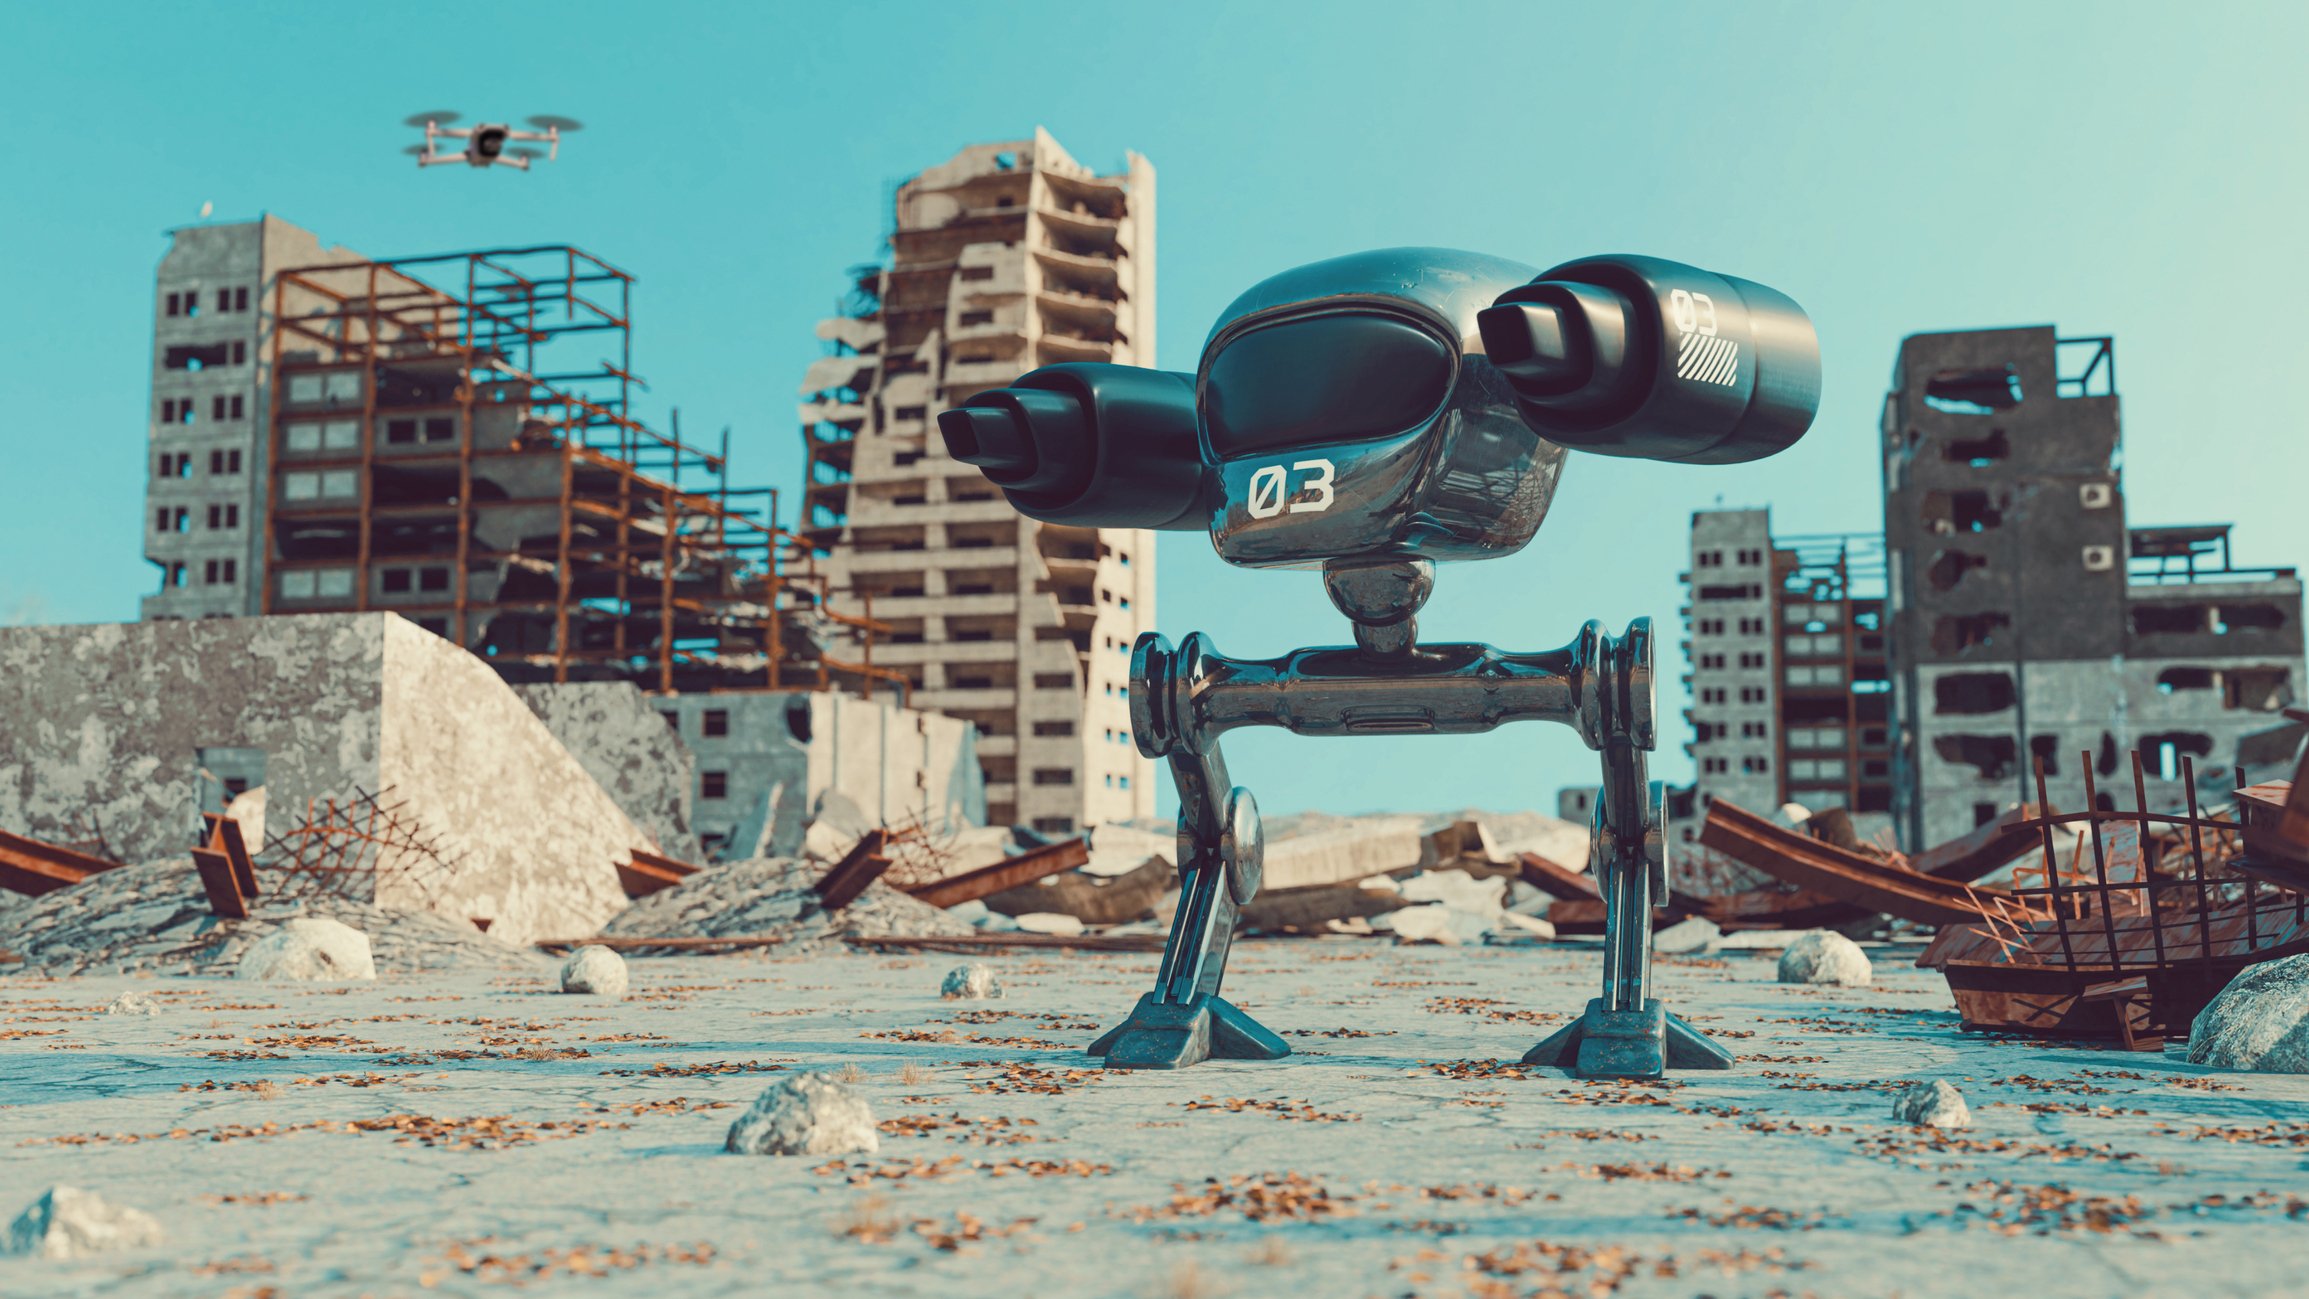 Construction-Robot-and-Drone